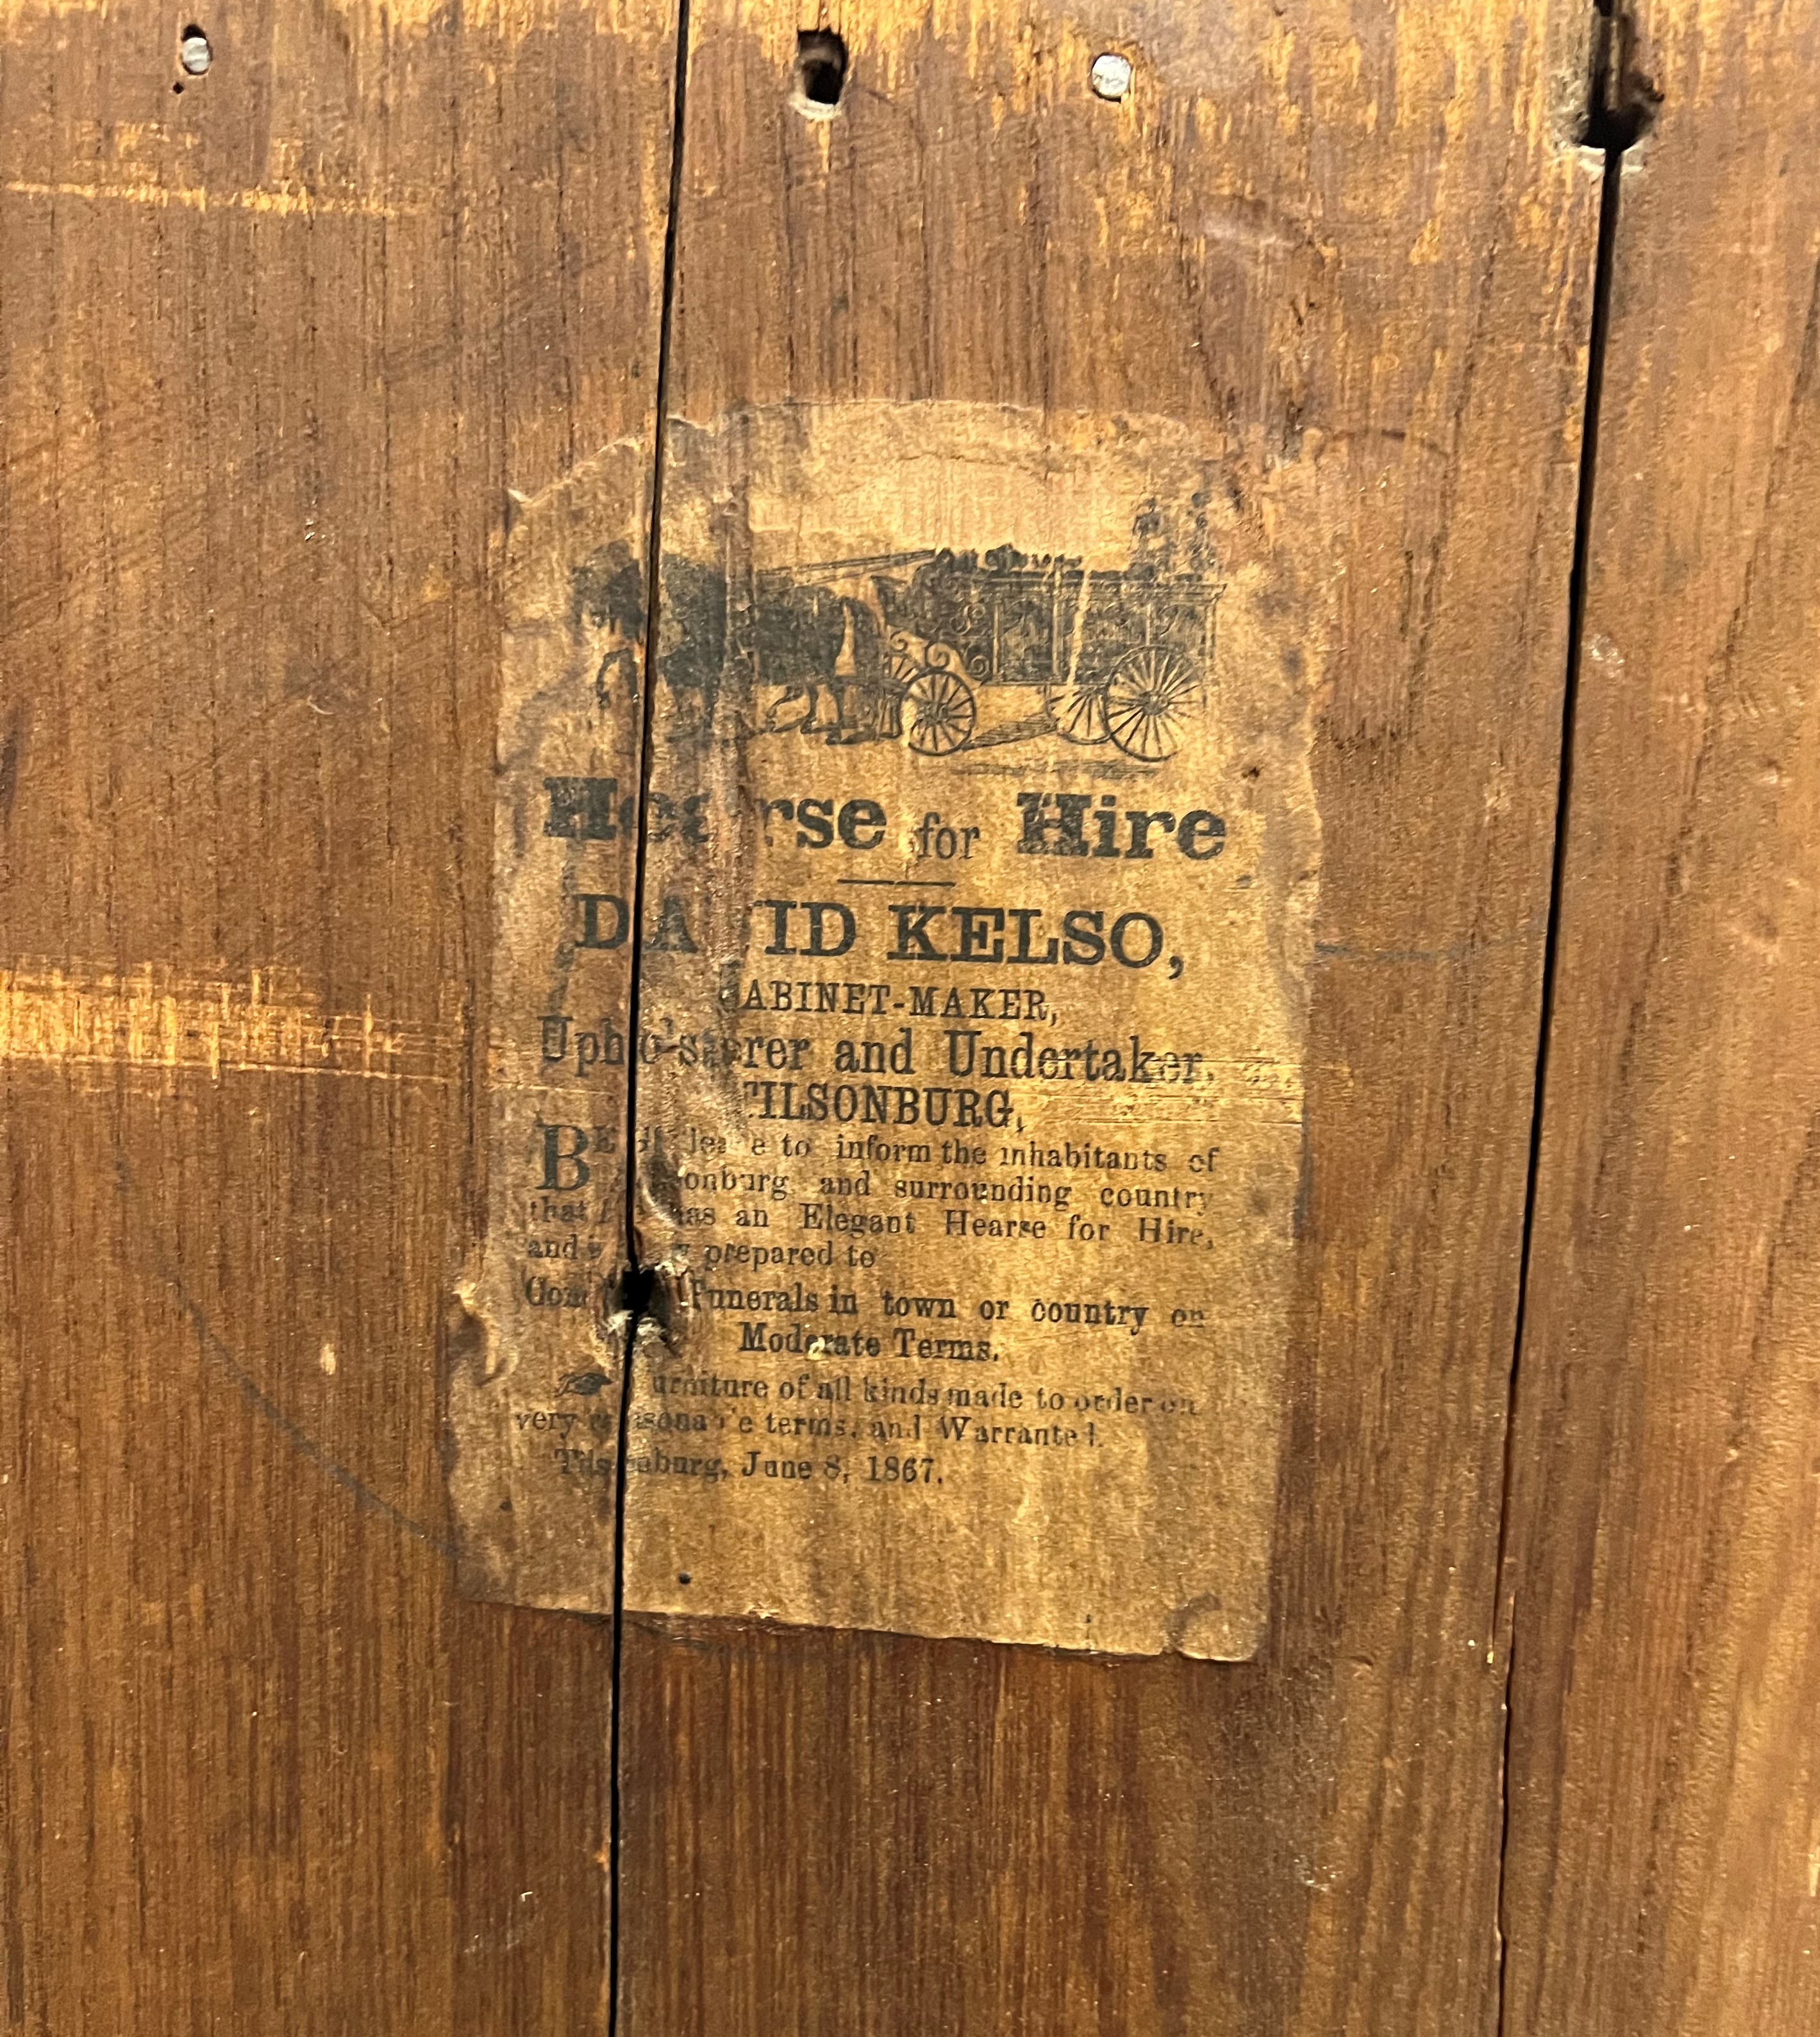 An advertisement pasted onto a wooden board for David Kelso's undertaker business. The advertisement features horses pulling a hearse.